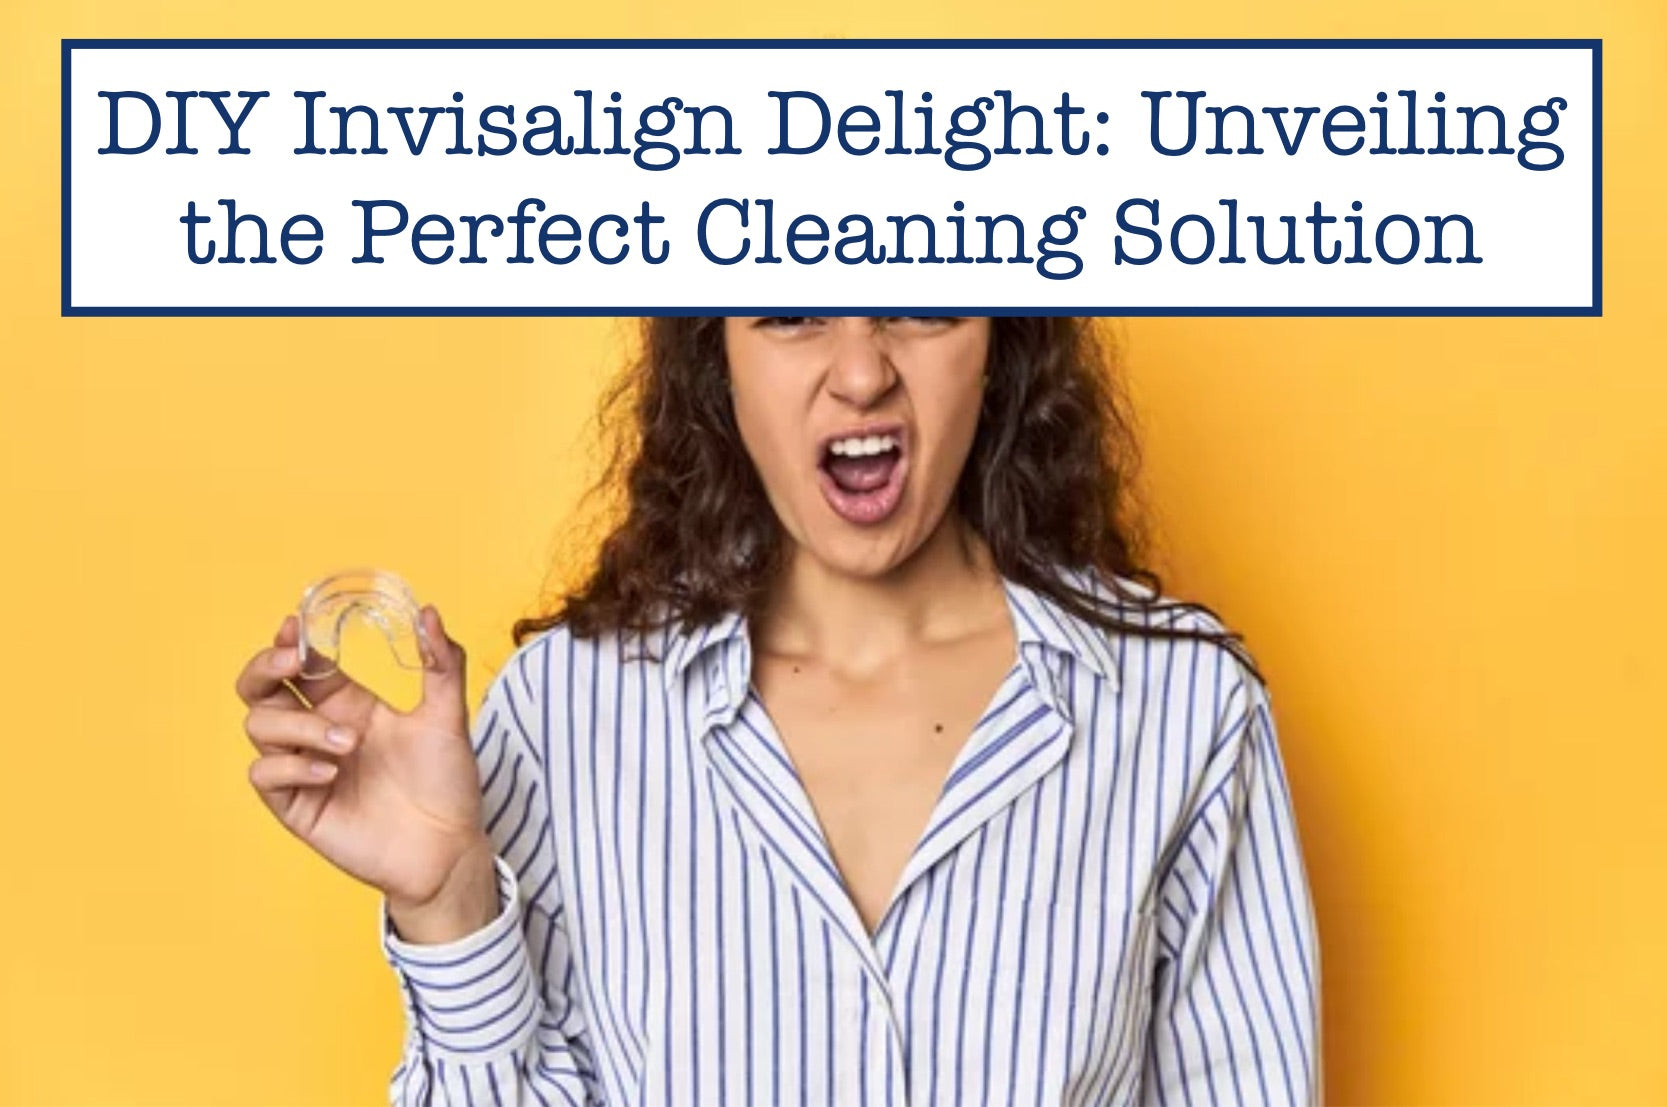 DIY Invisalign Delight: Unveiling the Perfect Cleaning Solution